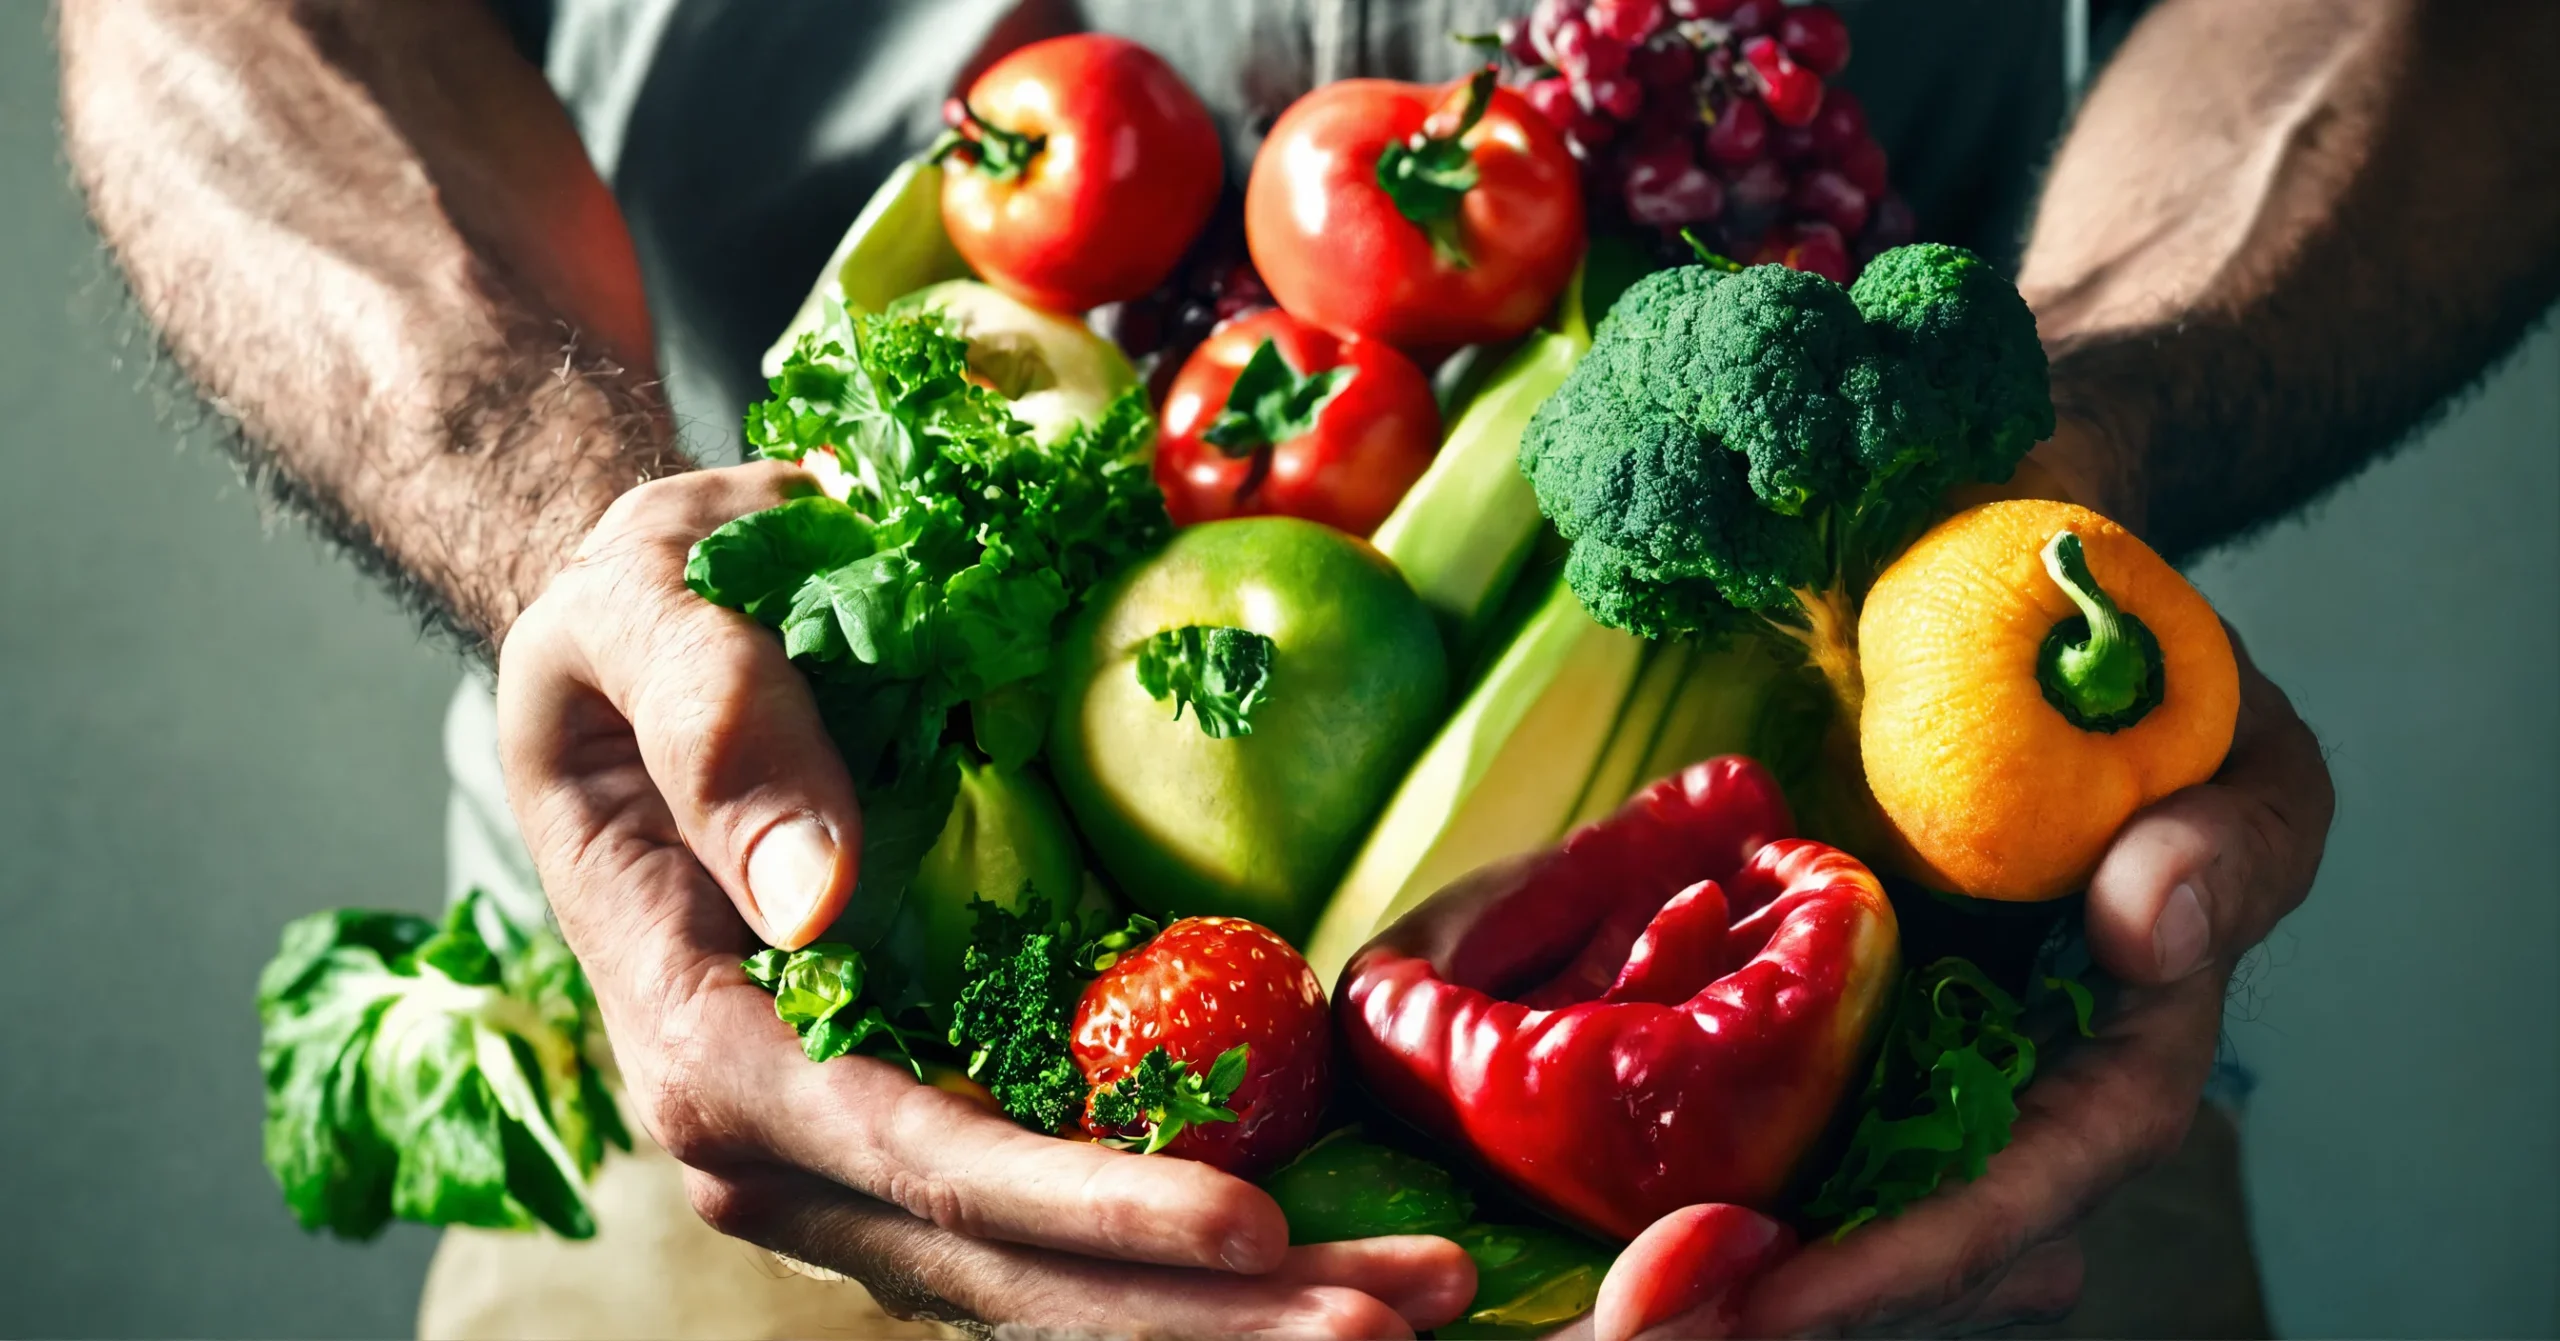 8 basic tips for eating healthy to combat heart disease and ensure a nutritious diet